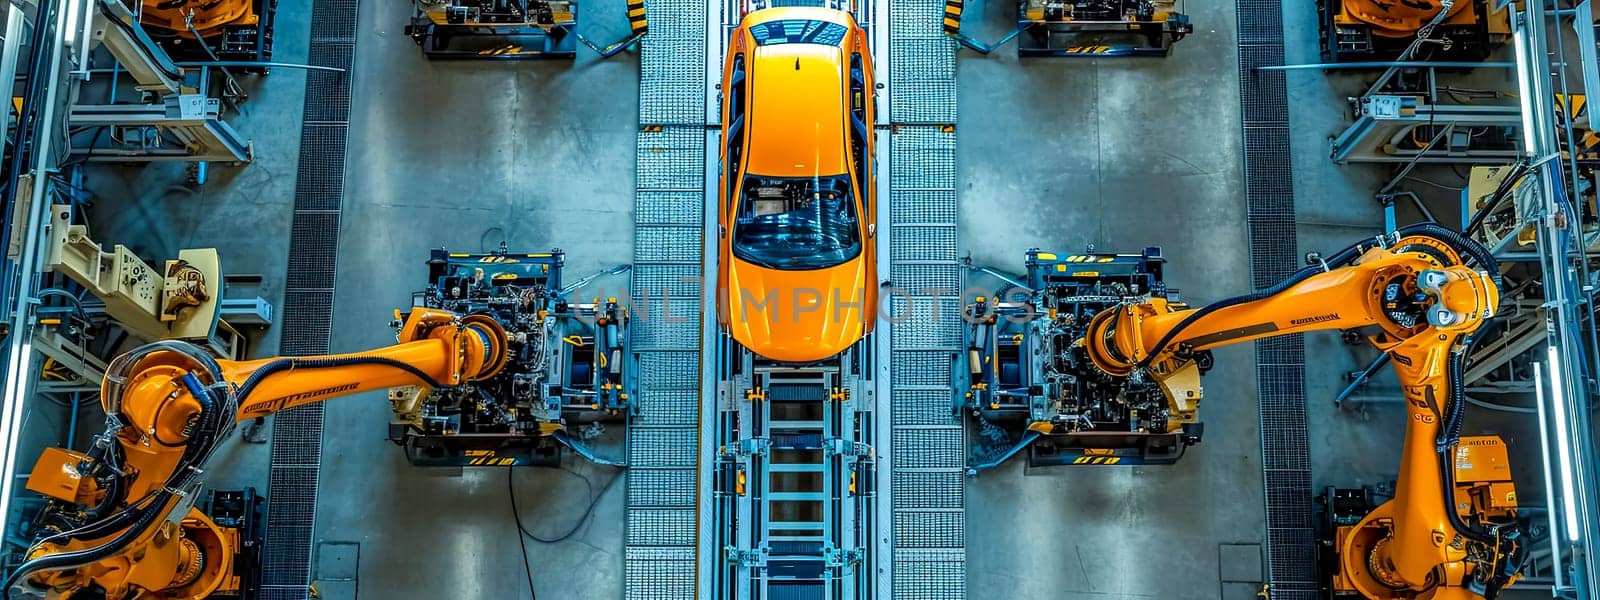 An aerial shot of a vibrant orange car on an assembly line, surrounded by precision robots in an automotive manufacturing plant, showcasing modern industrial automation.